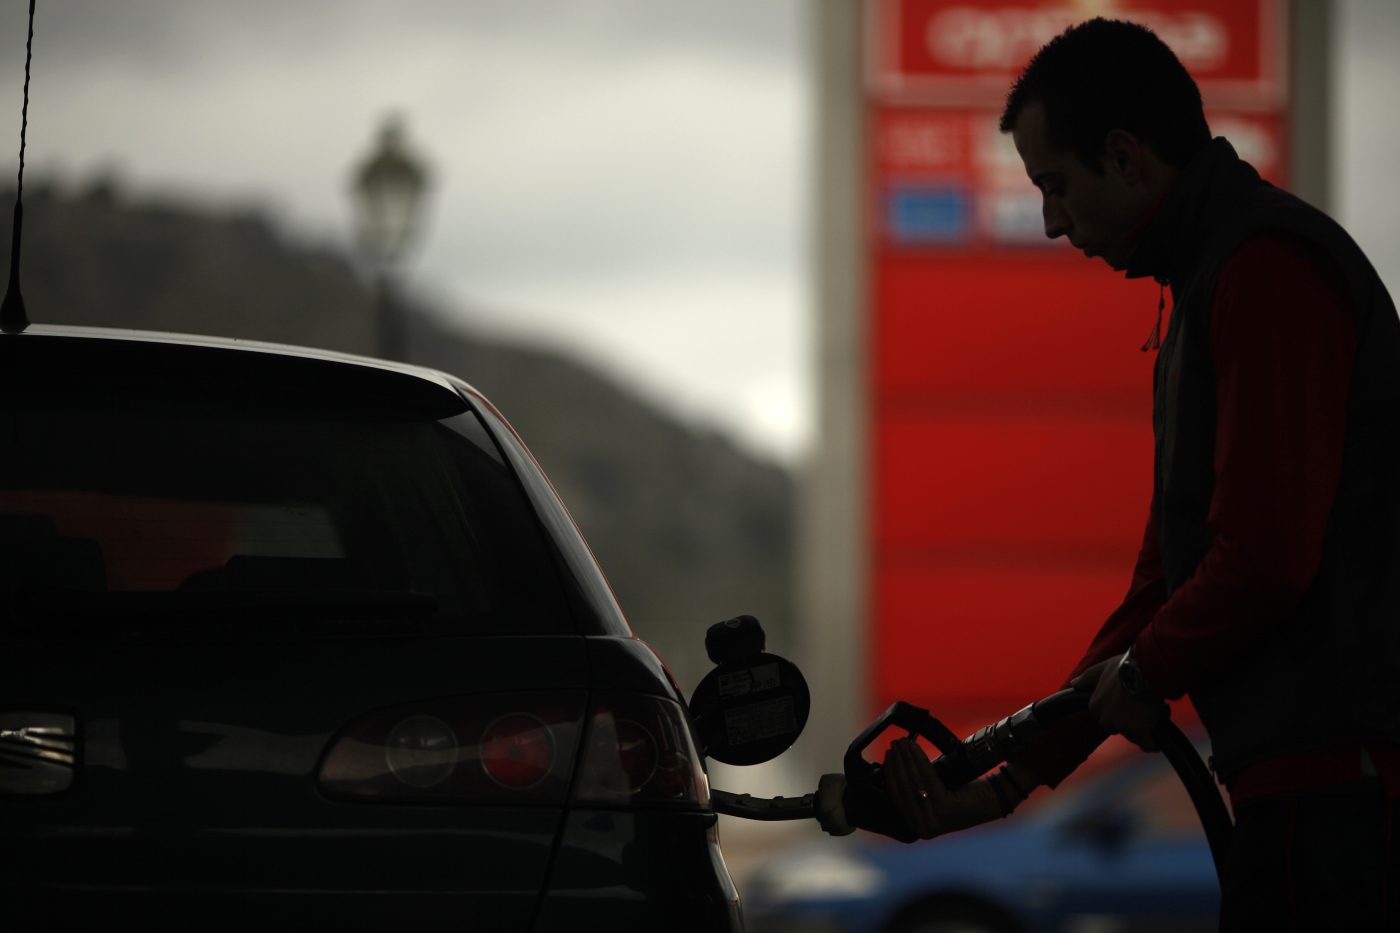 Photo: A worker pumps petrol into a customer's car at a petrol station in Cuevas del Becerro, near Malaga, southern Spain March 4, 2011. Credit: REUTERS/Jon Nazca